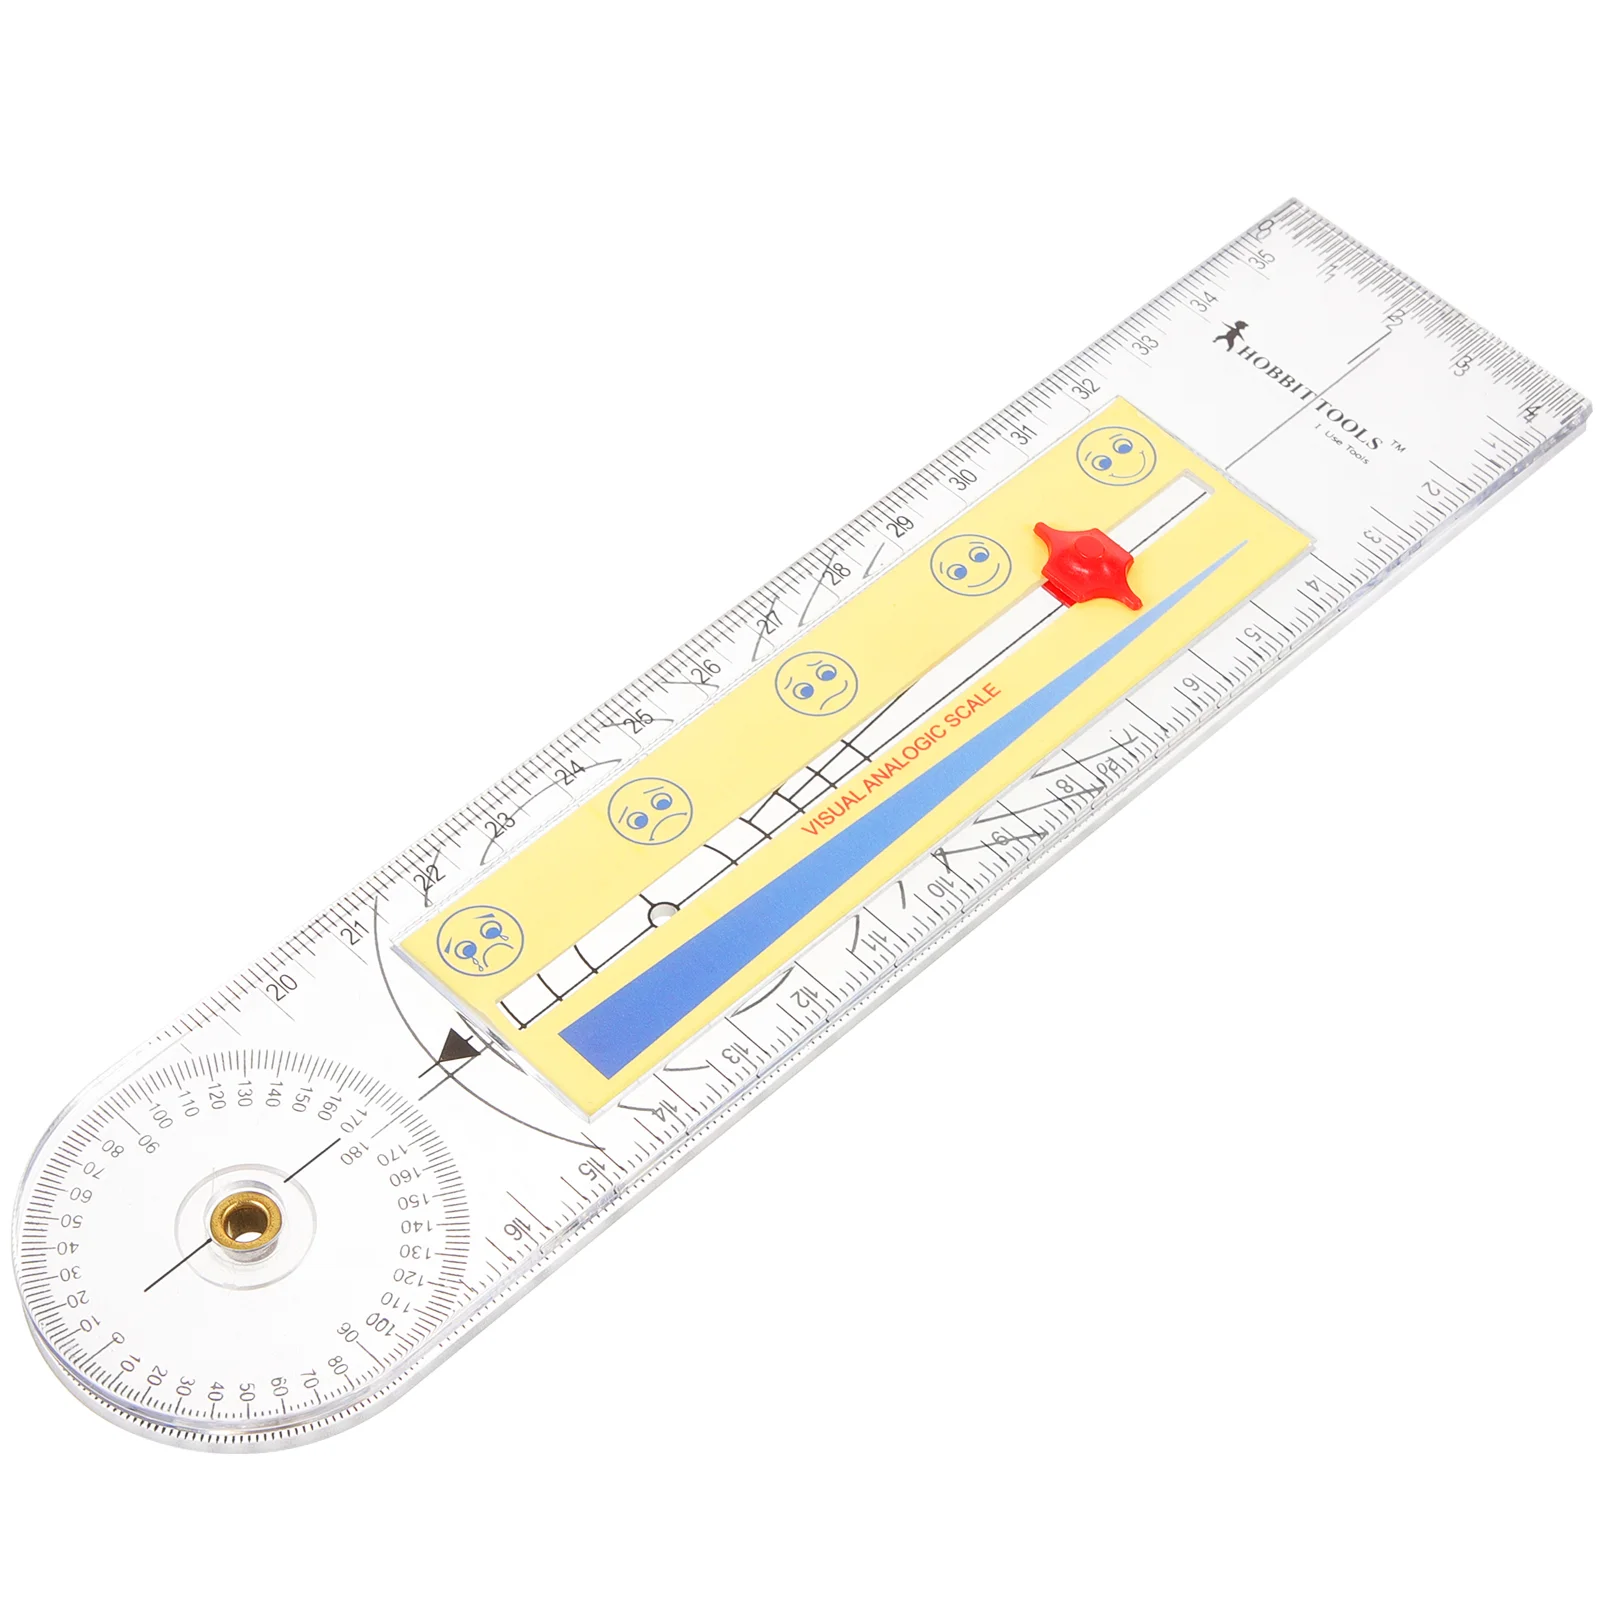 Angle Finder Tool Finger Goniometer Measuring Rotary Medical Abs Ruler Hospital Folding 2 in 1 digital angle meter inclinometer digital angle ruler electronic goniometer protractor angle finder measuring tool